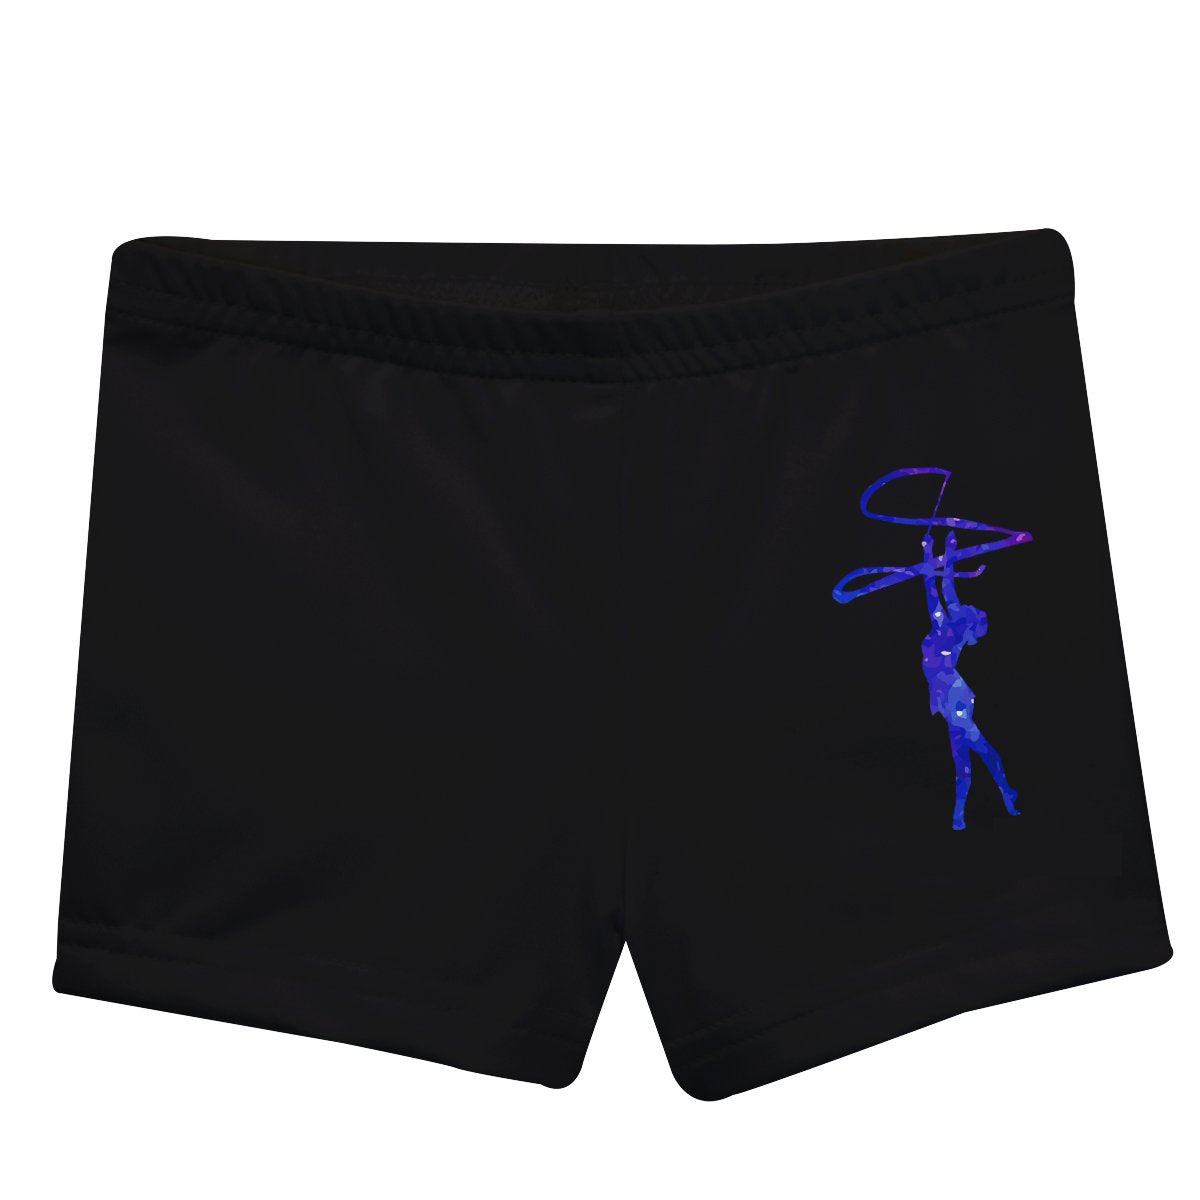 Gymnast Silhouette Personalized Name Black Shorties - Wimziy&Co.